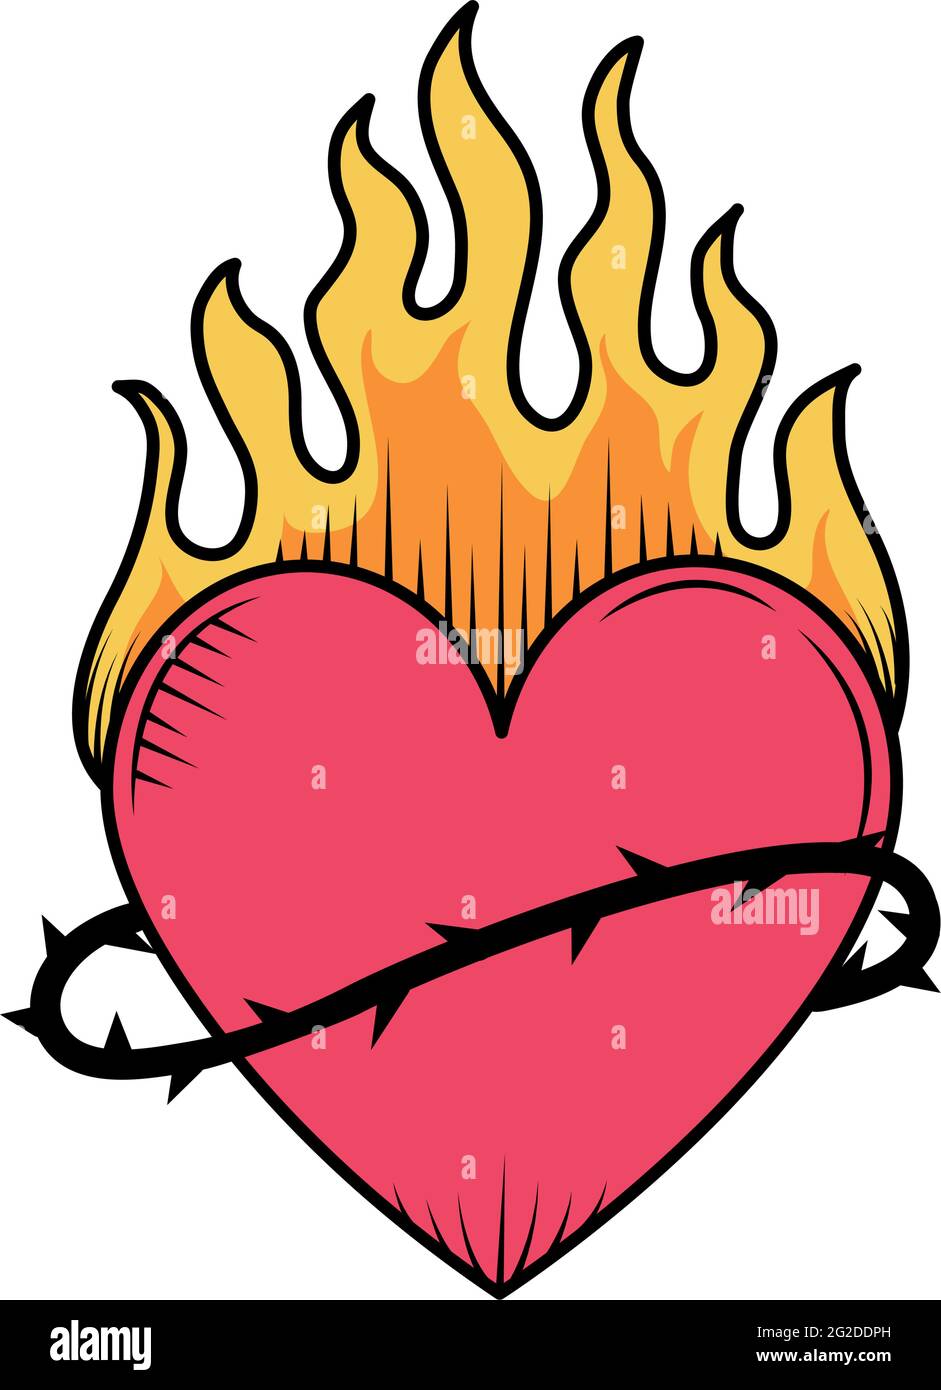 Flaming heart Cut Out Stock Images & Pictures - Alamy